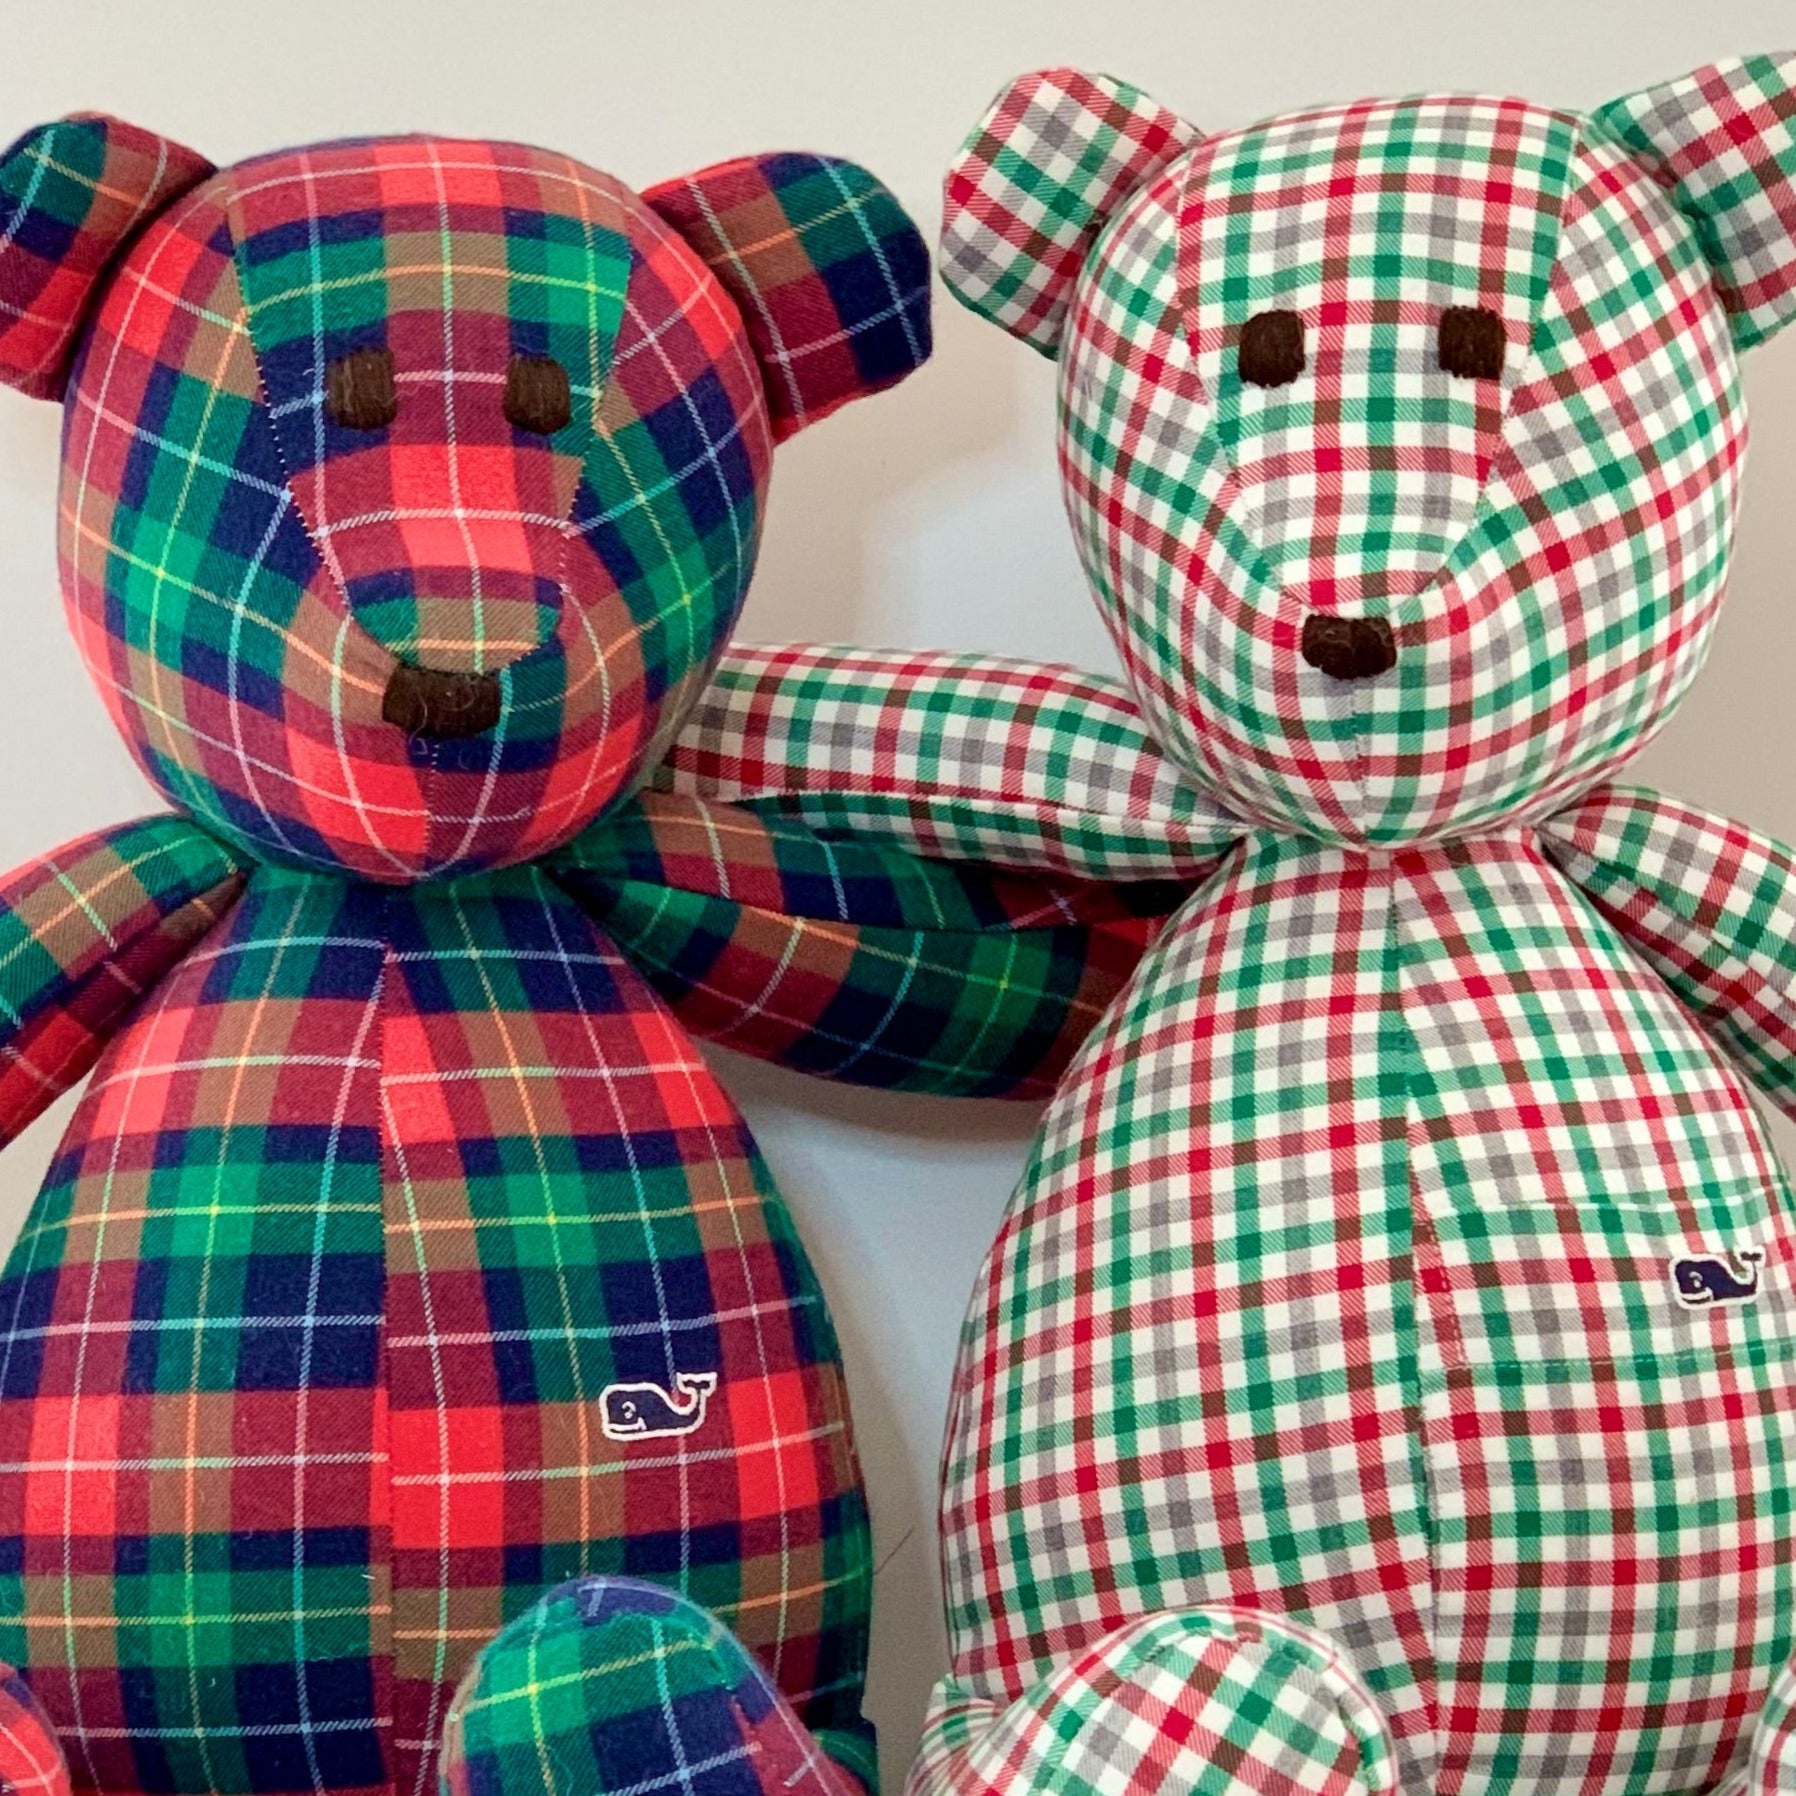 The Patchwork Bear - Crafted with love, each memory bear we make tells a  story of your past and the art of preserving memories. 🧵🌟 This one  captures childhood memories and is